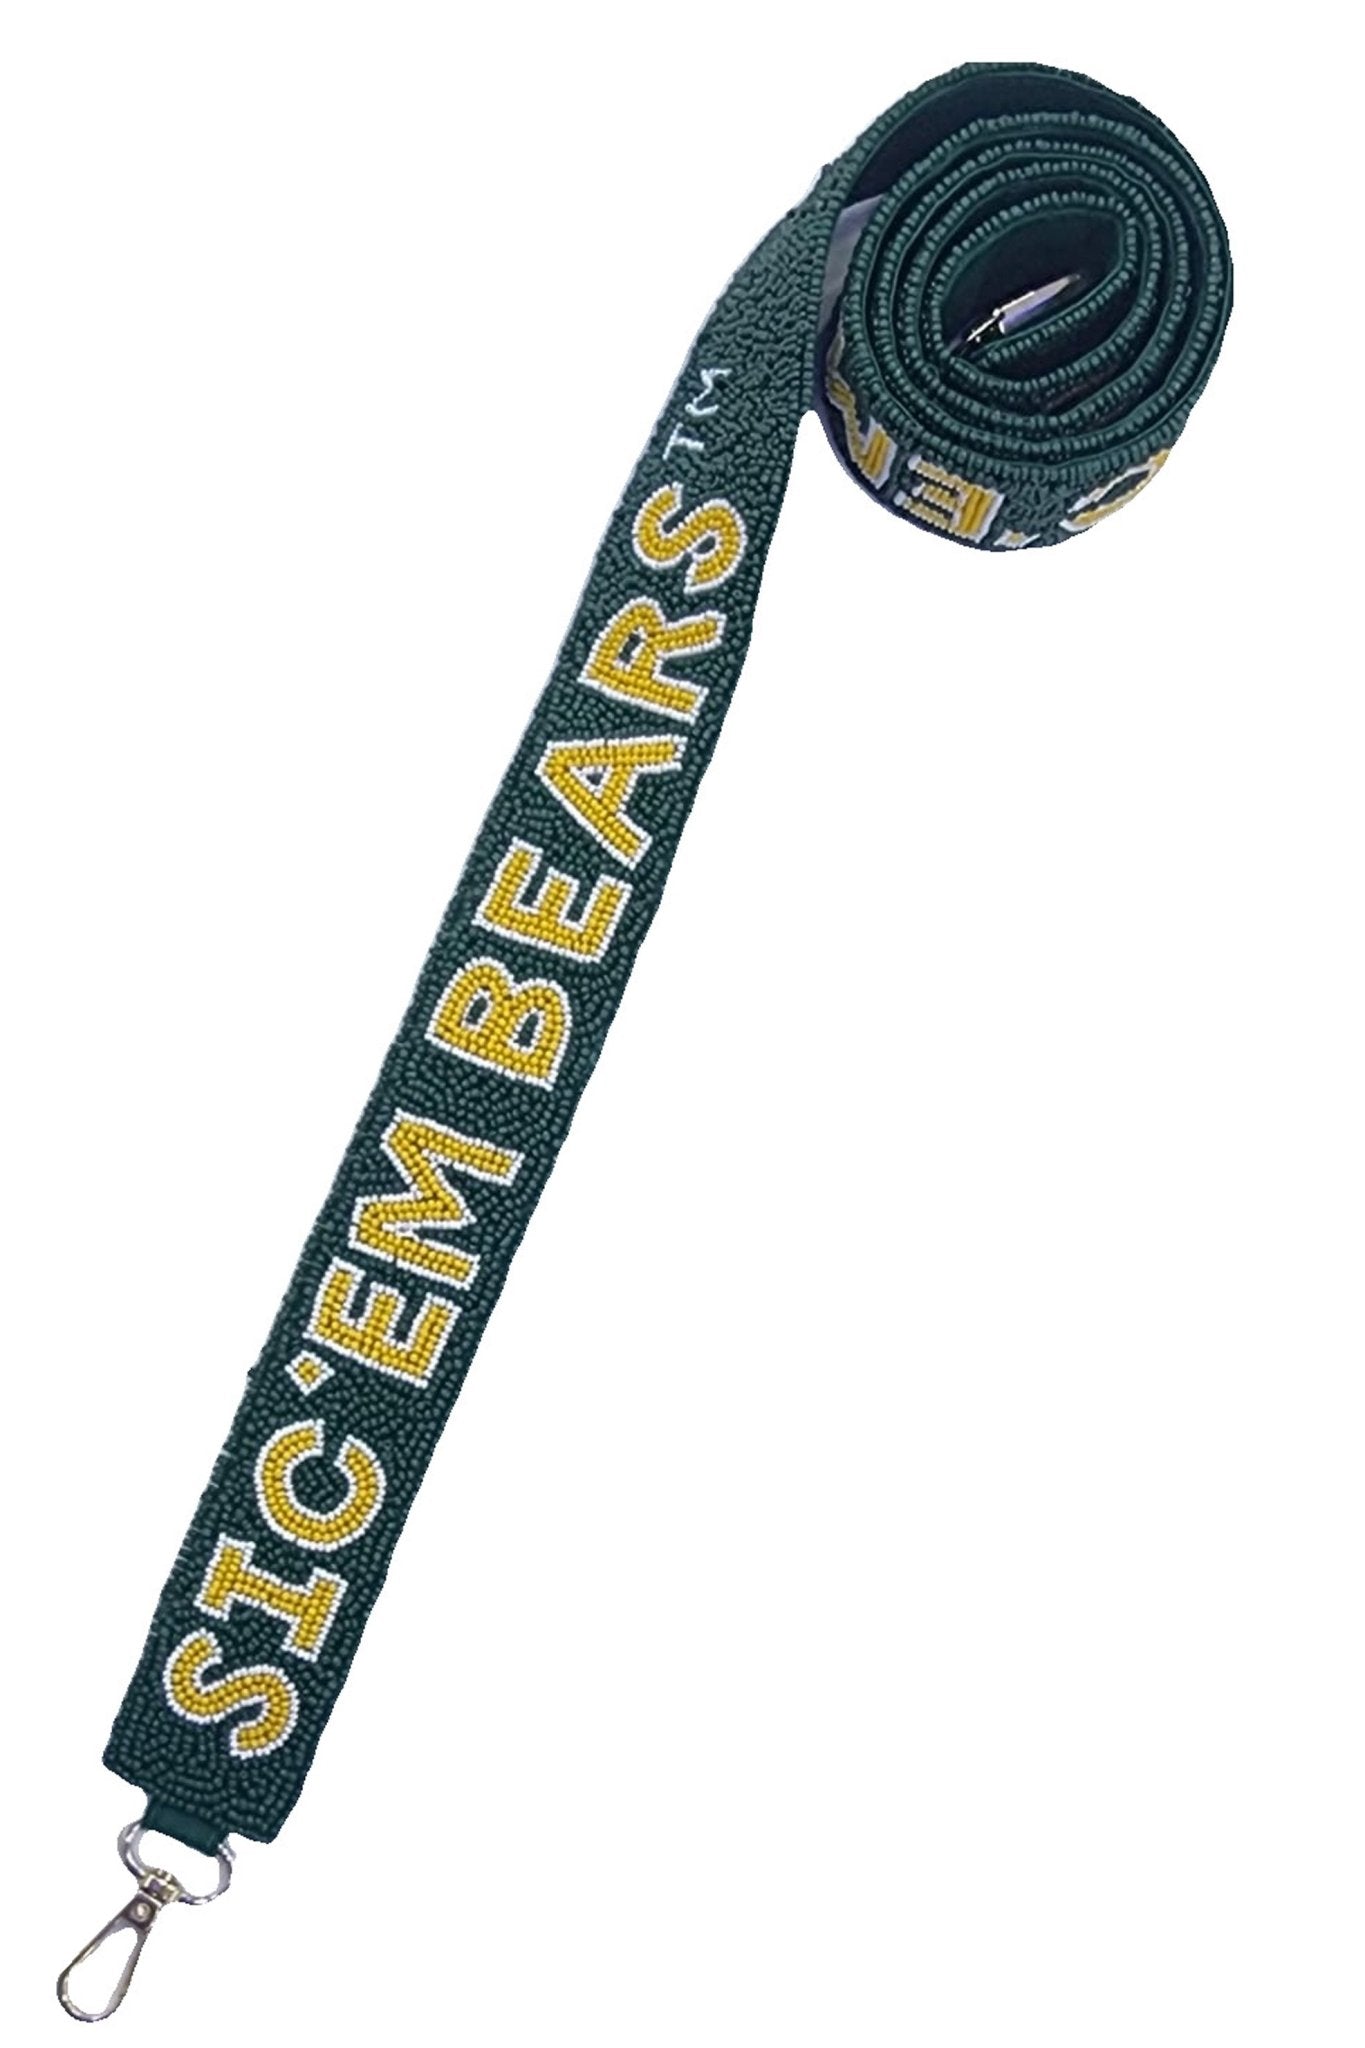 SIC 'EM Bears Green Beaded Bag Strap - Pizzazz, Inc. - Color Game